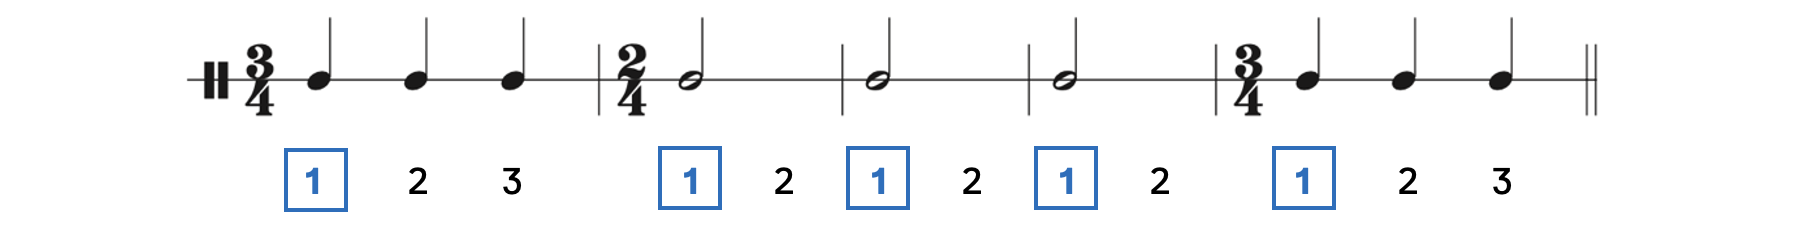 Changing time signatures make the hemiola more clear with accents every three beats and every two beats.